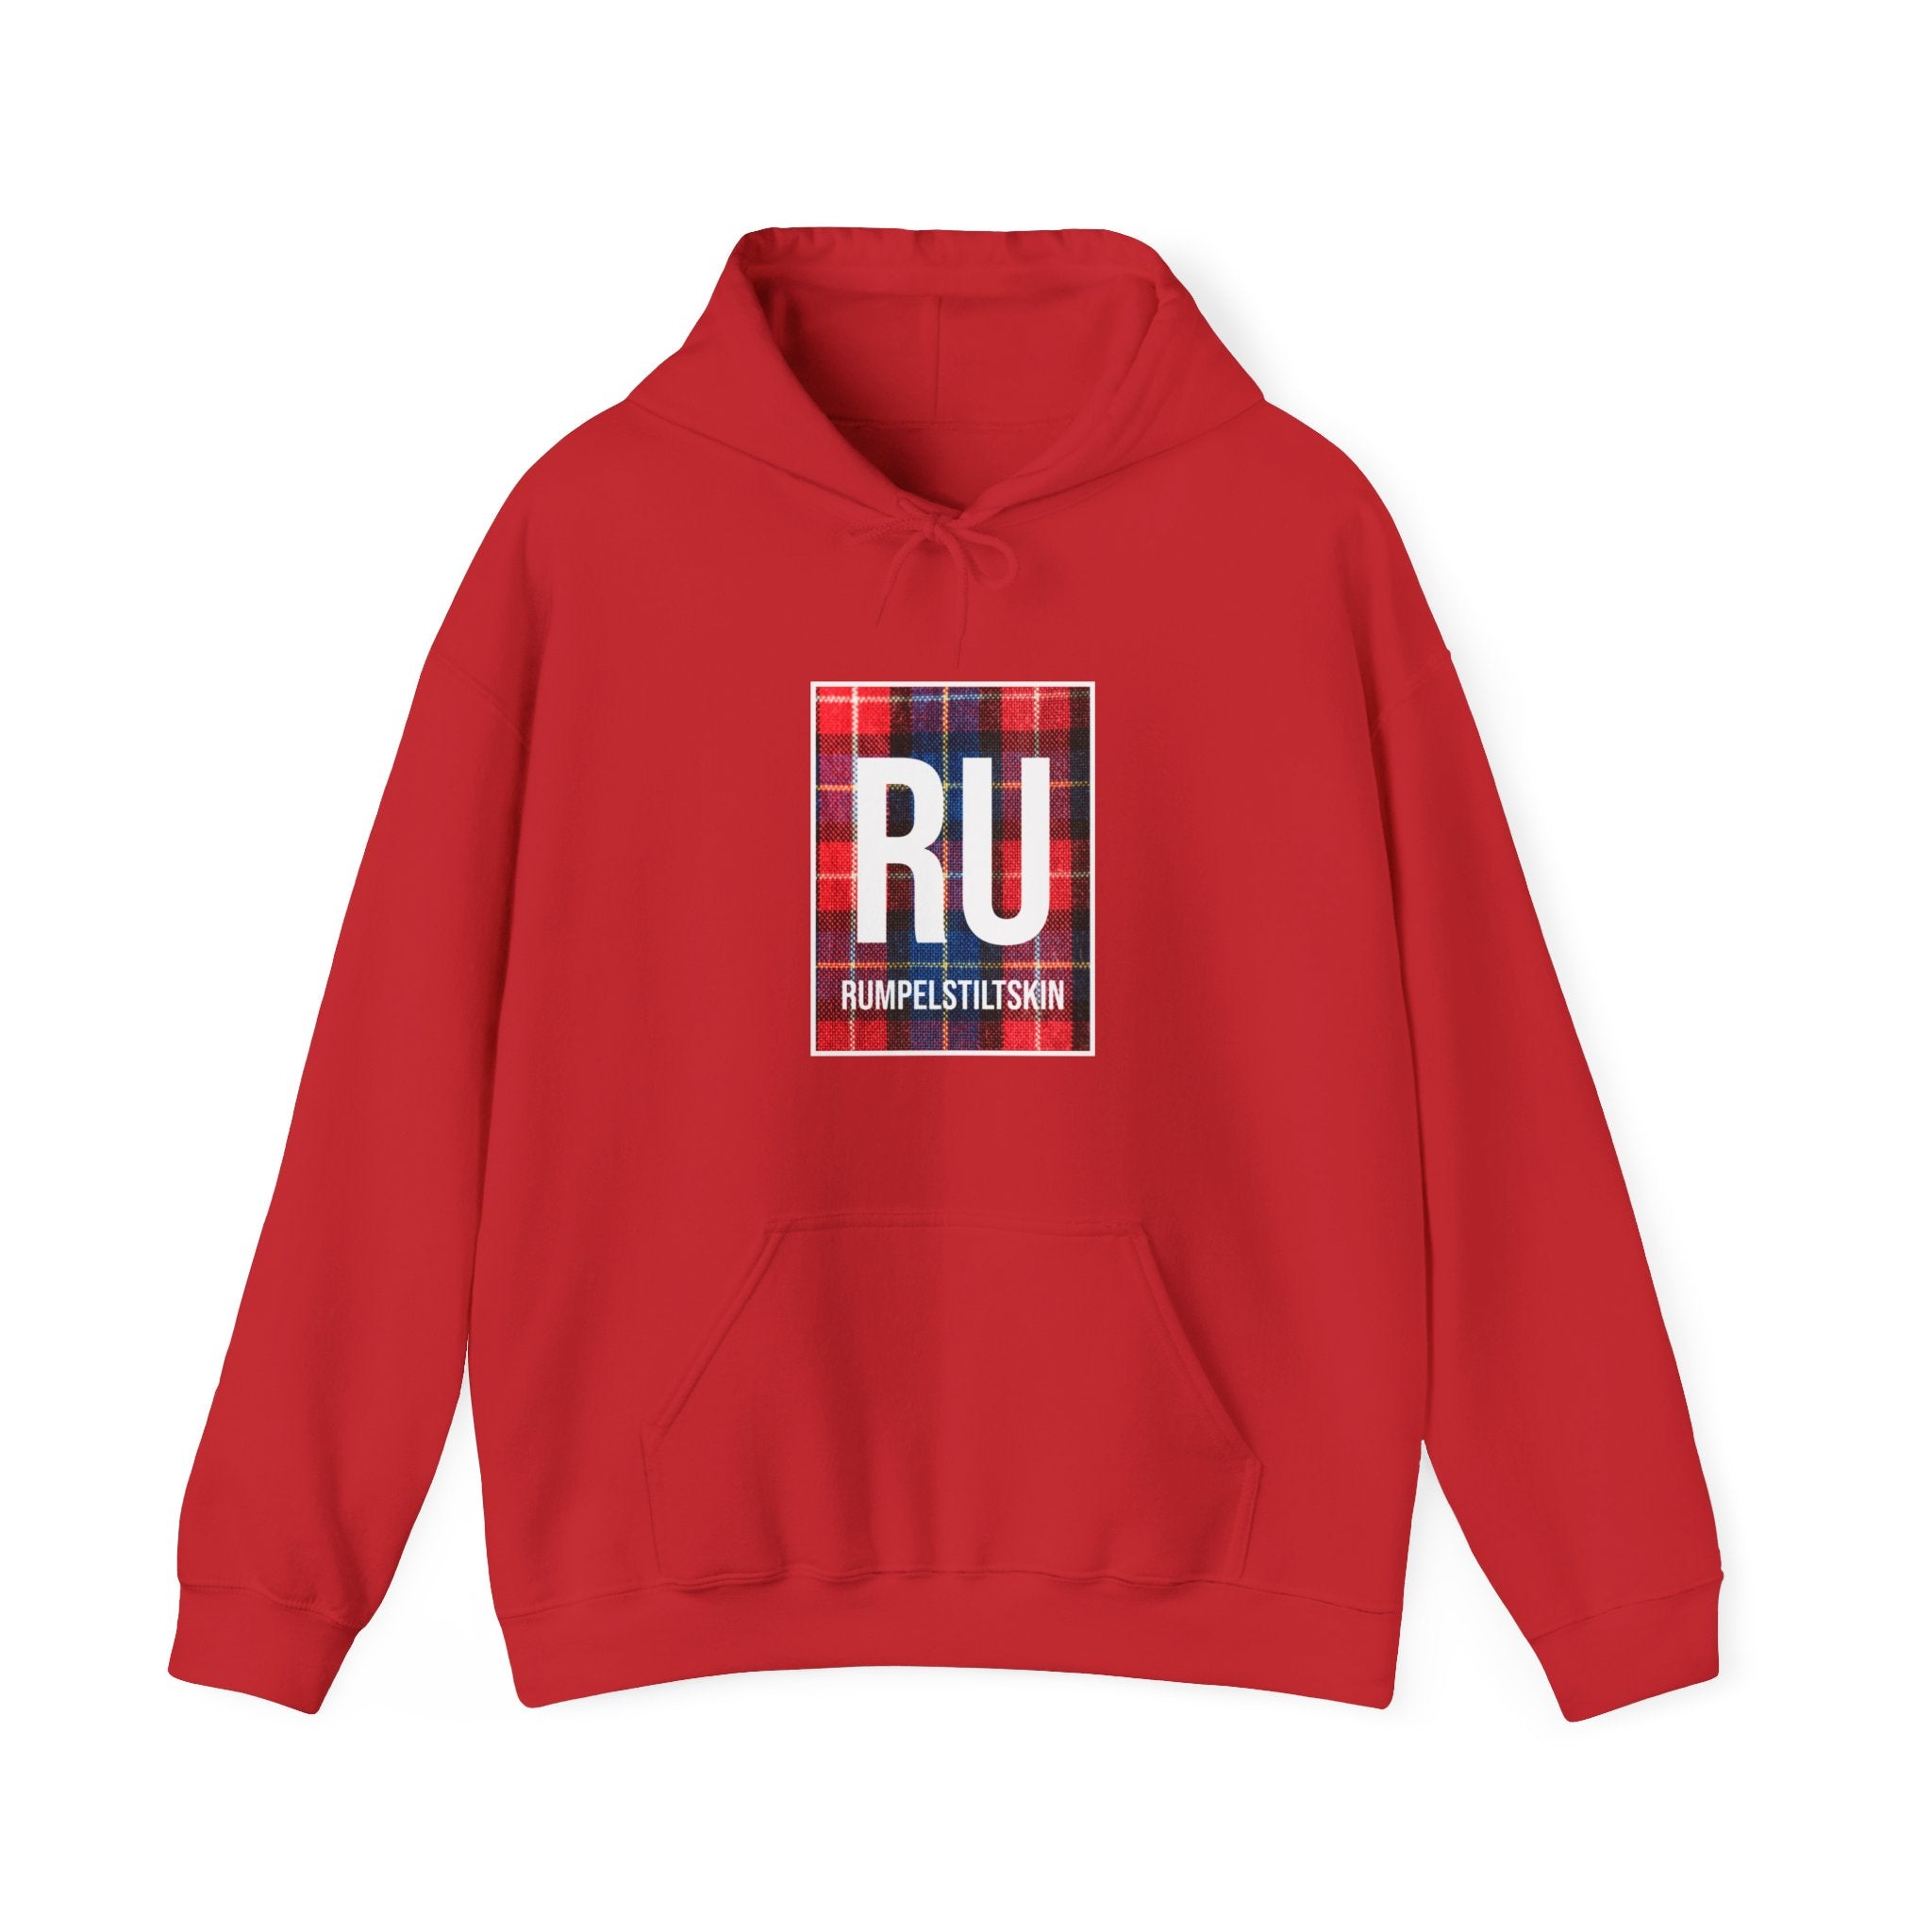 A red RU - Hooded Sweatshirt with a front pocket featuring a graphic design in the center that displays the letters "RU" and the word "Rumpelstiltskin" underneath, offering ultimate comfort and style.